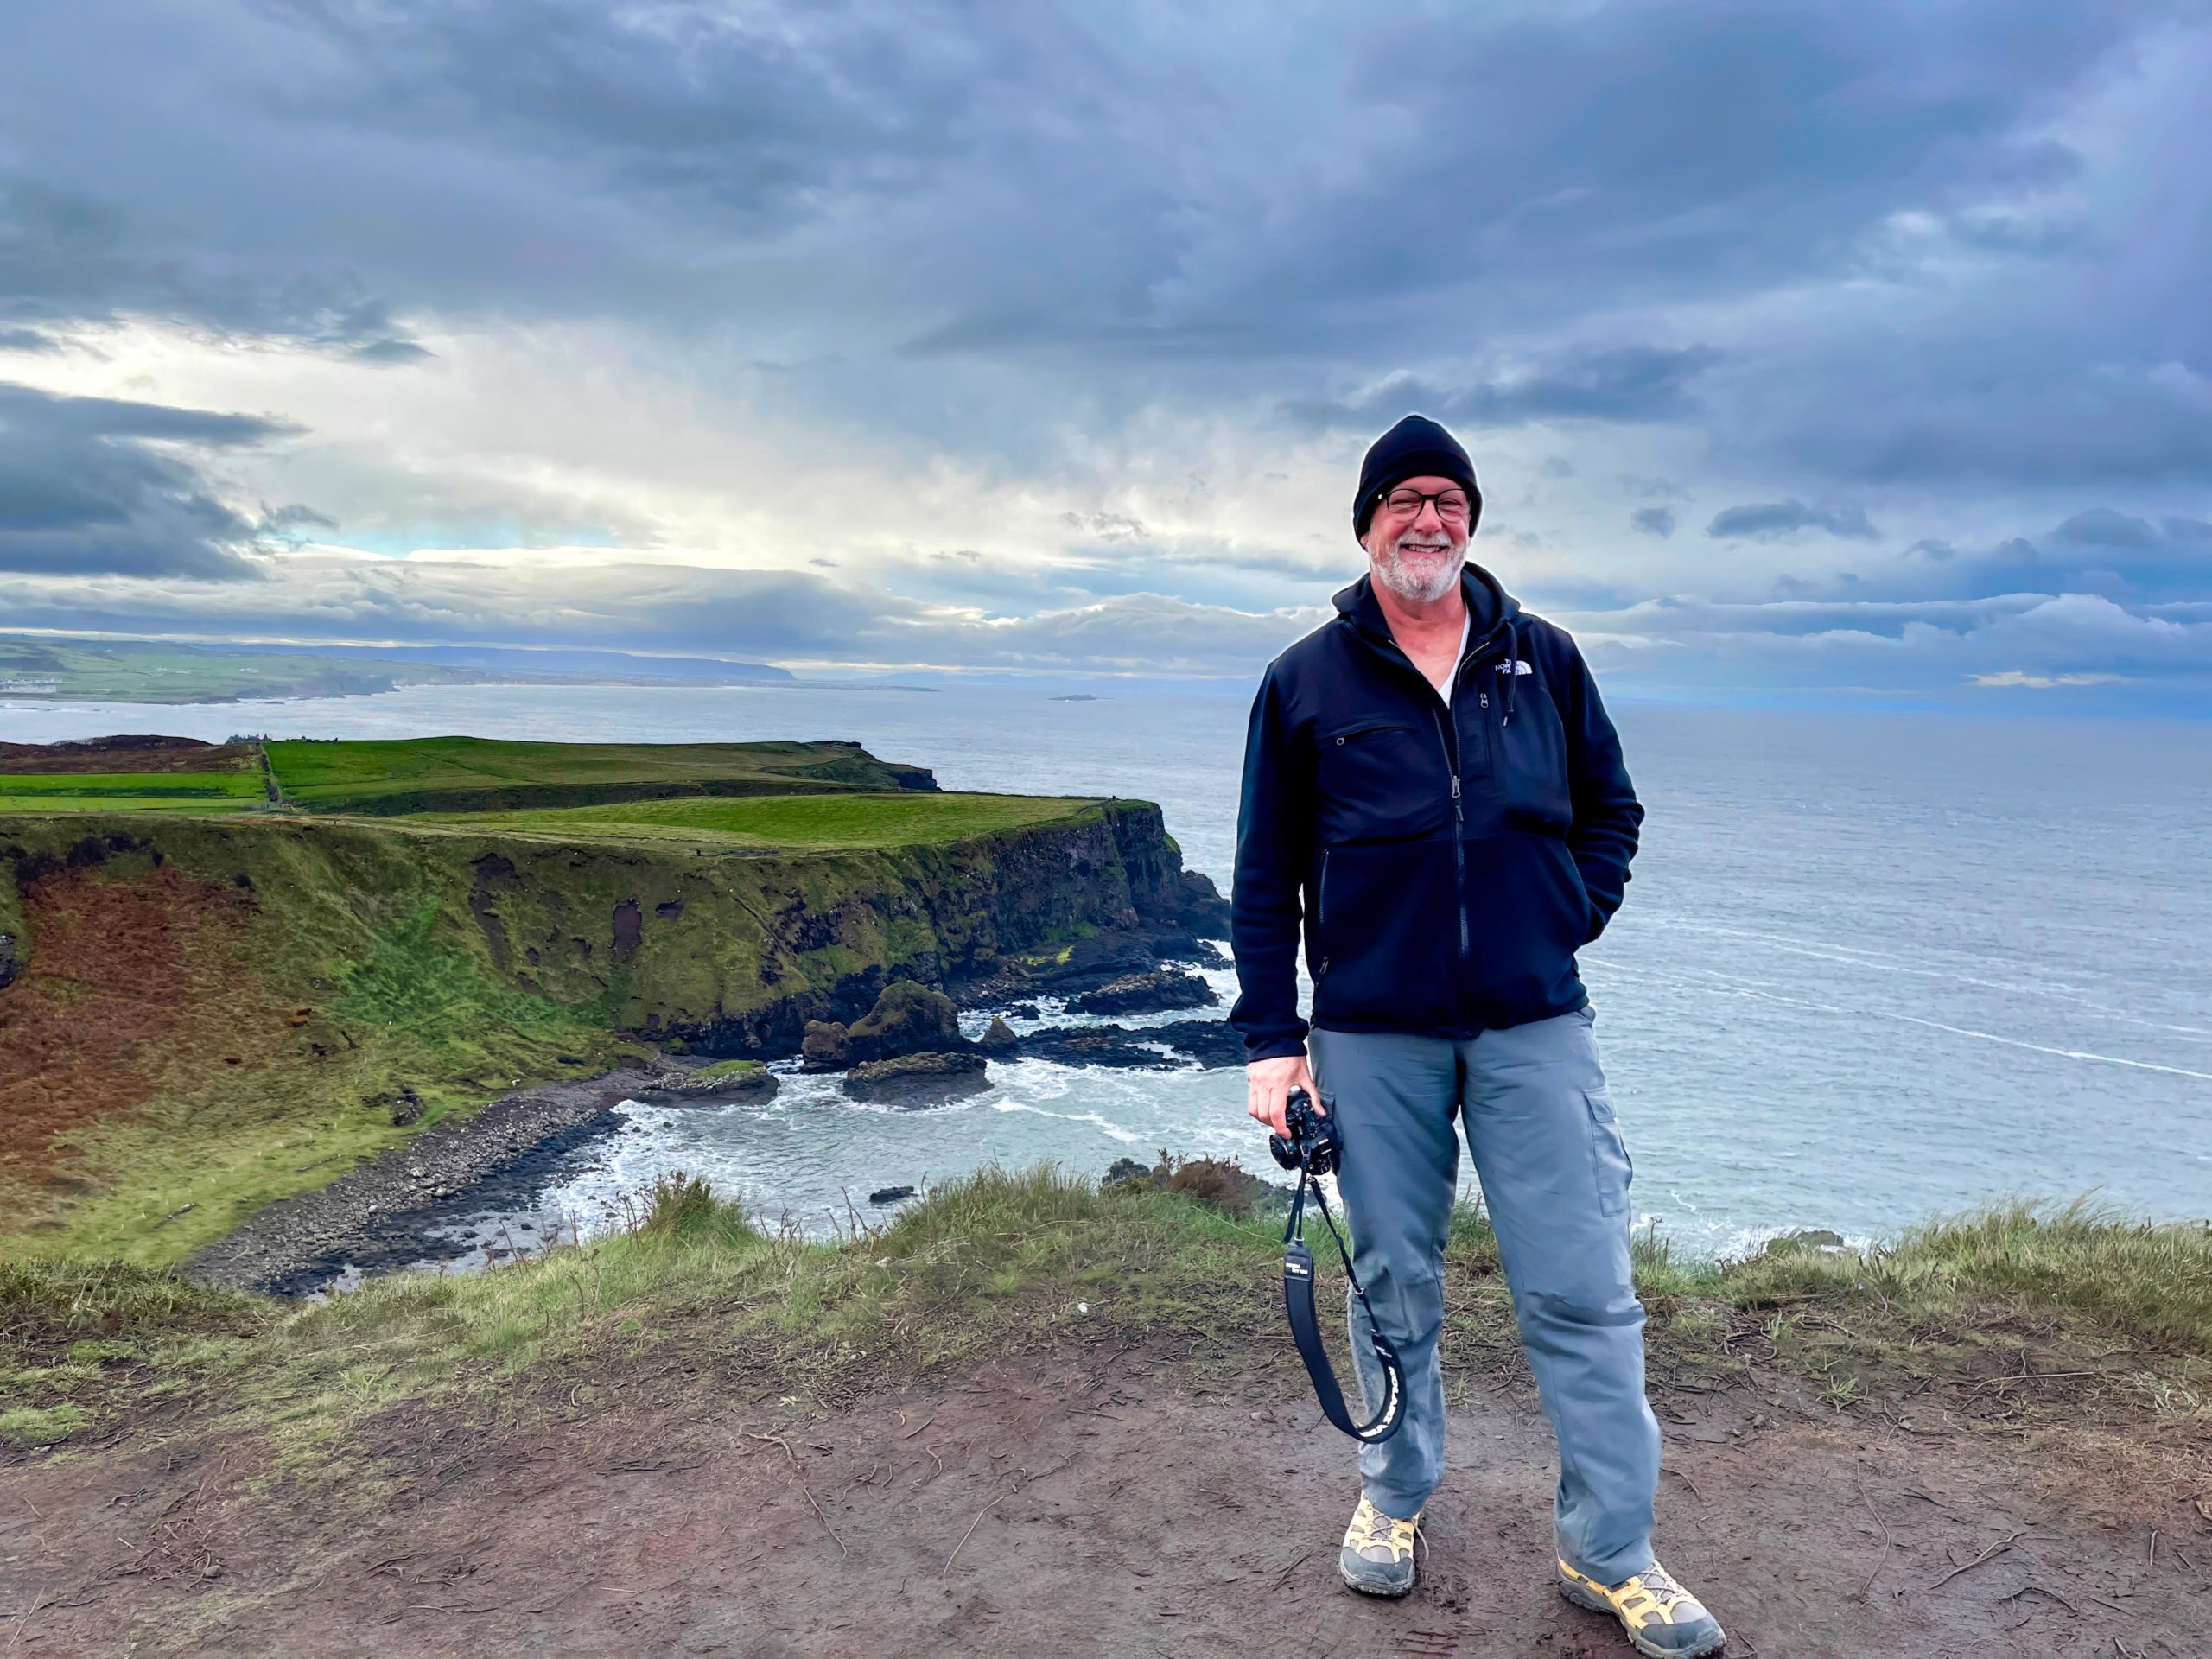 A photo of the author standing on top of a cliff in County Antrim, Northern Ireland. The sea is behind him and he is holding a camera in his hand.